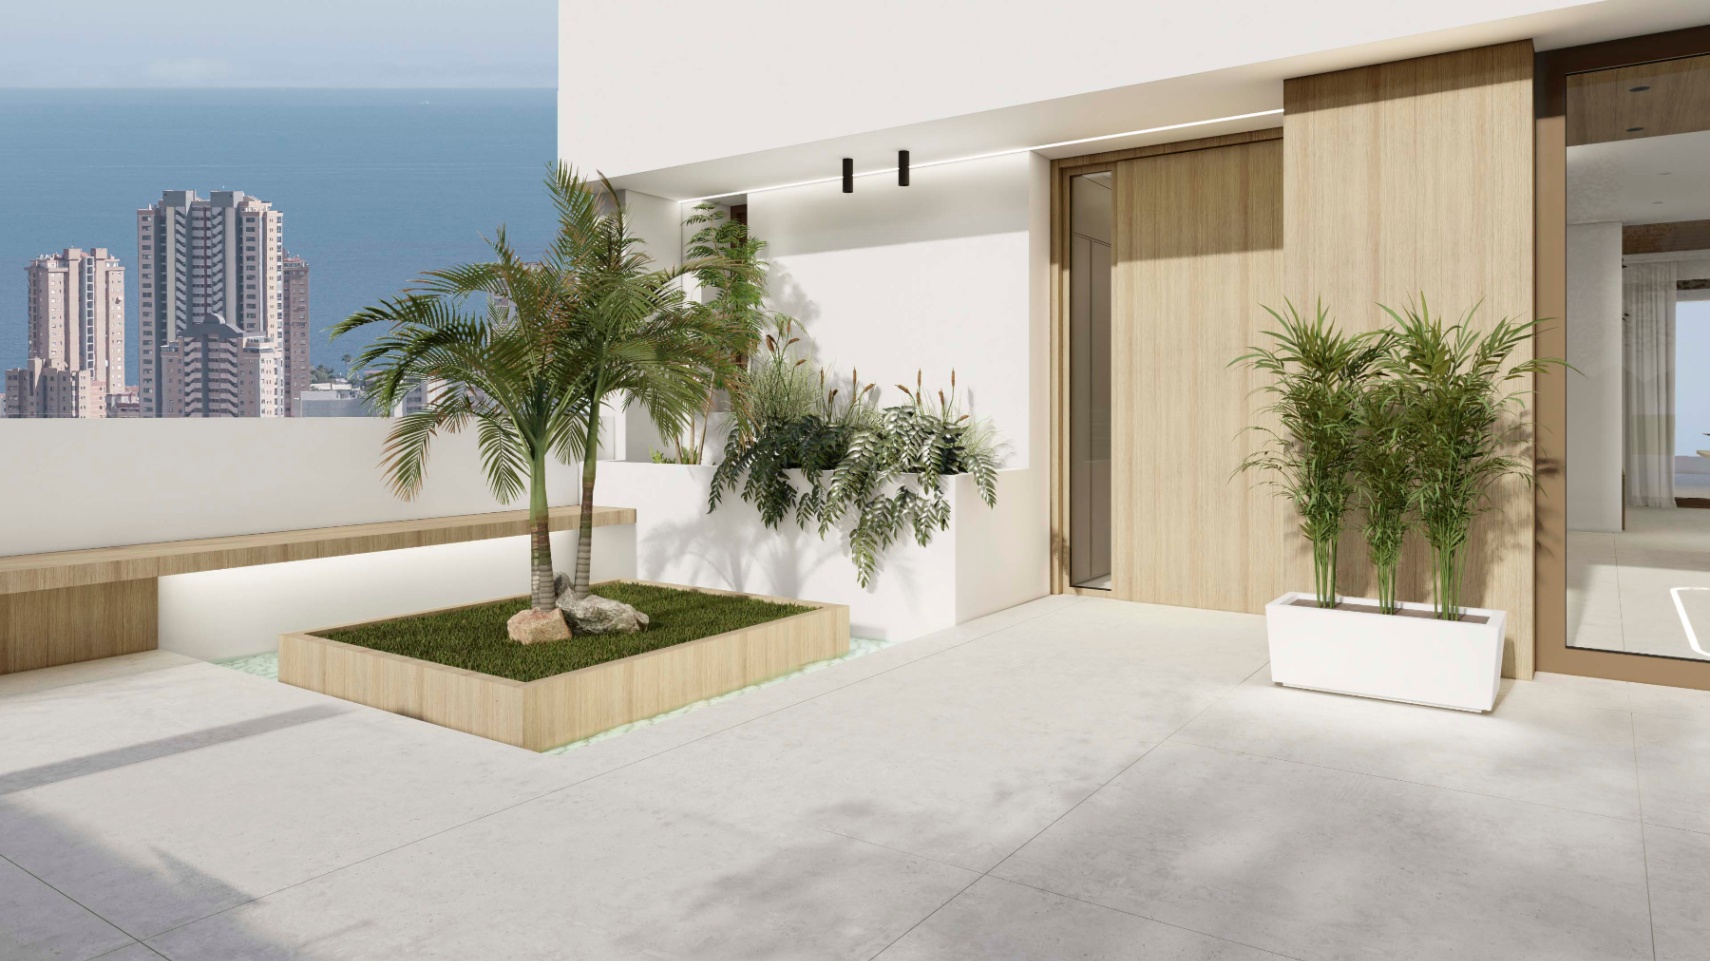 New build modern villa with views of the sea and Benidorm Skyline in Finestrat